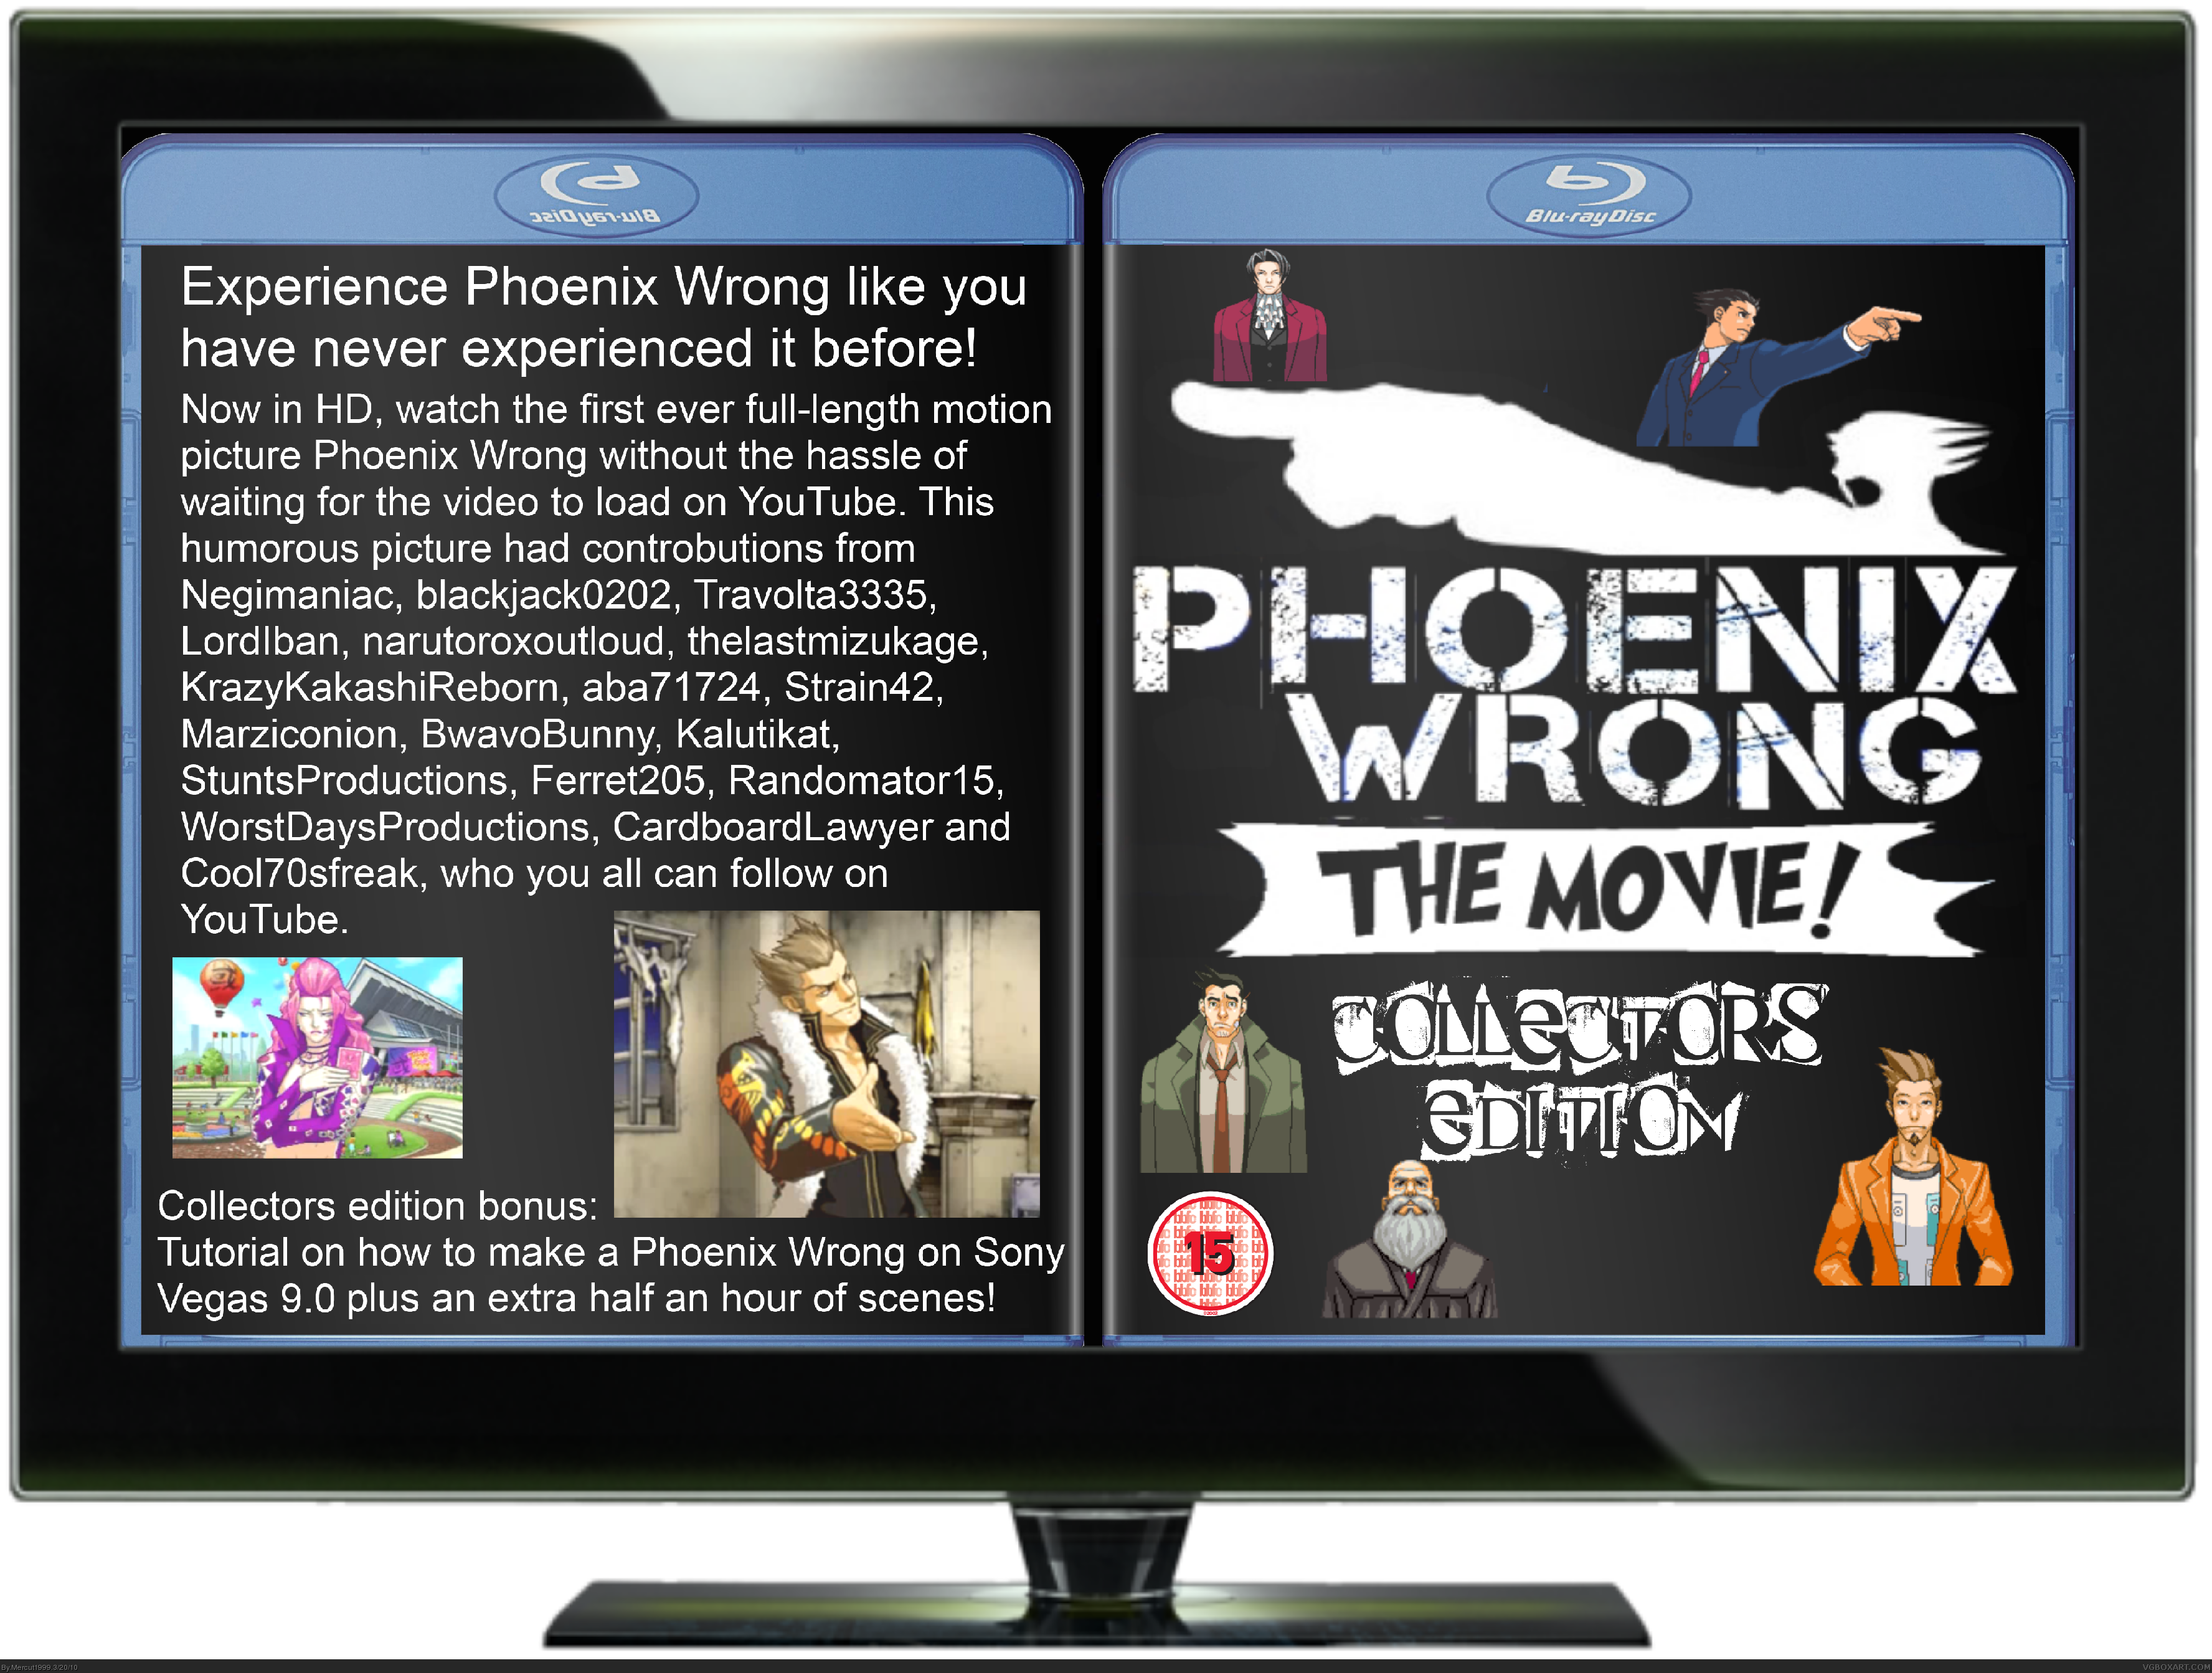 Phoenix Wrong The Movie Collecters Edition box cover